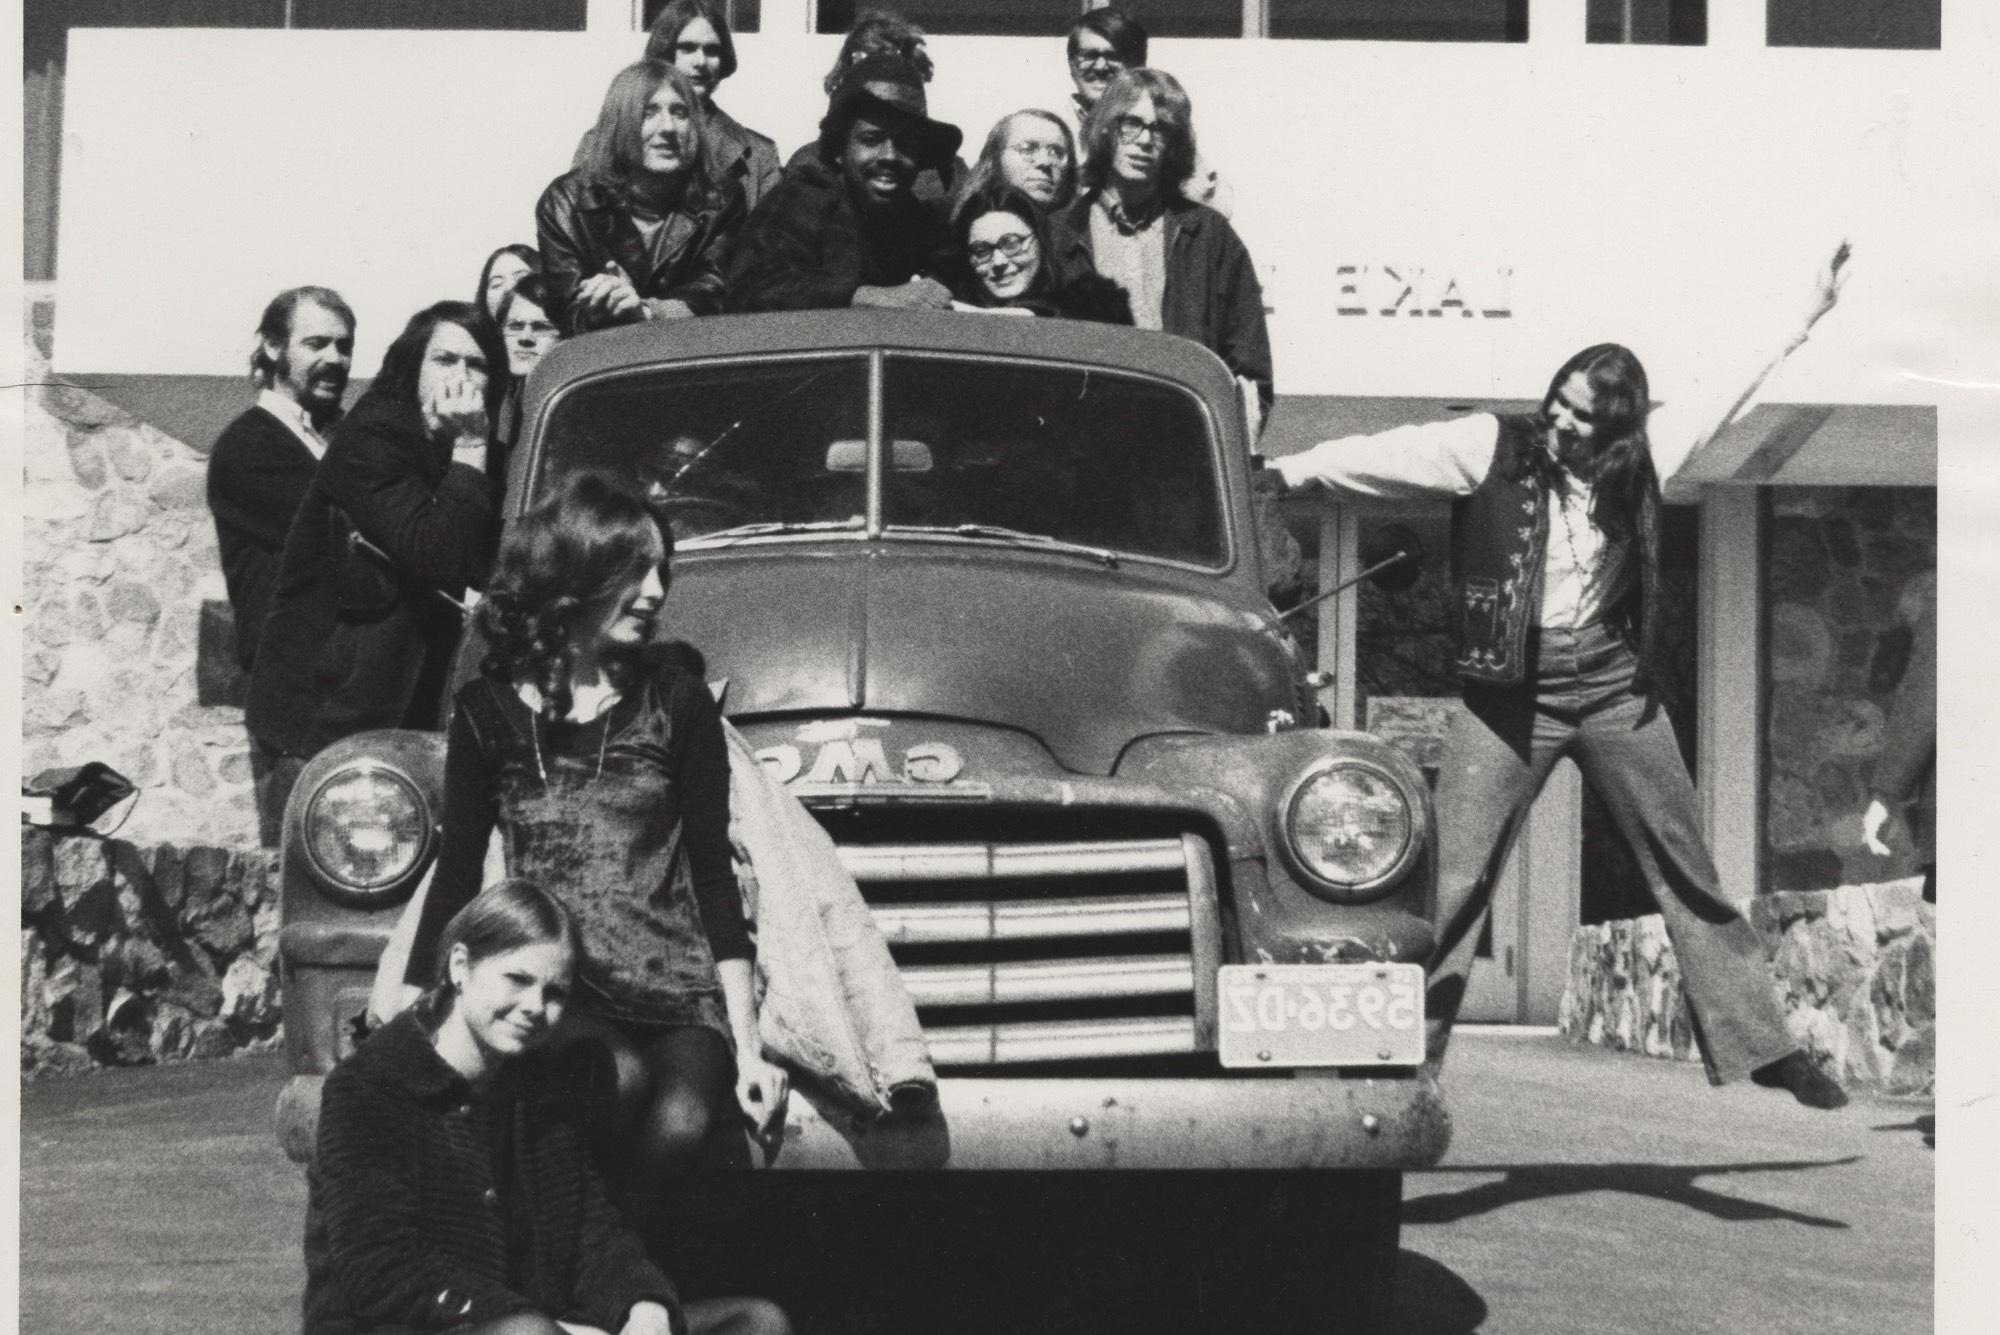 Thomas Jefferson College students posing on truck in front of Lake Huron Hall. Keep on Truckin' poster was based on this series of images.